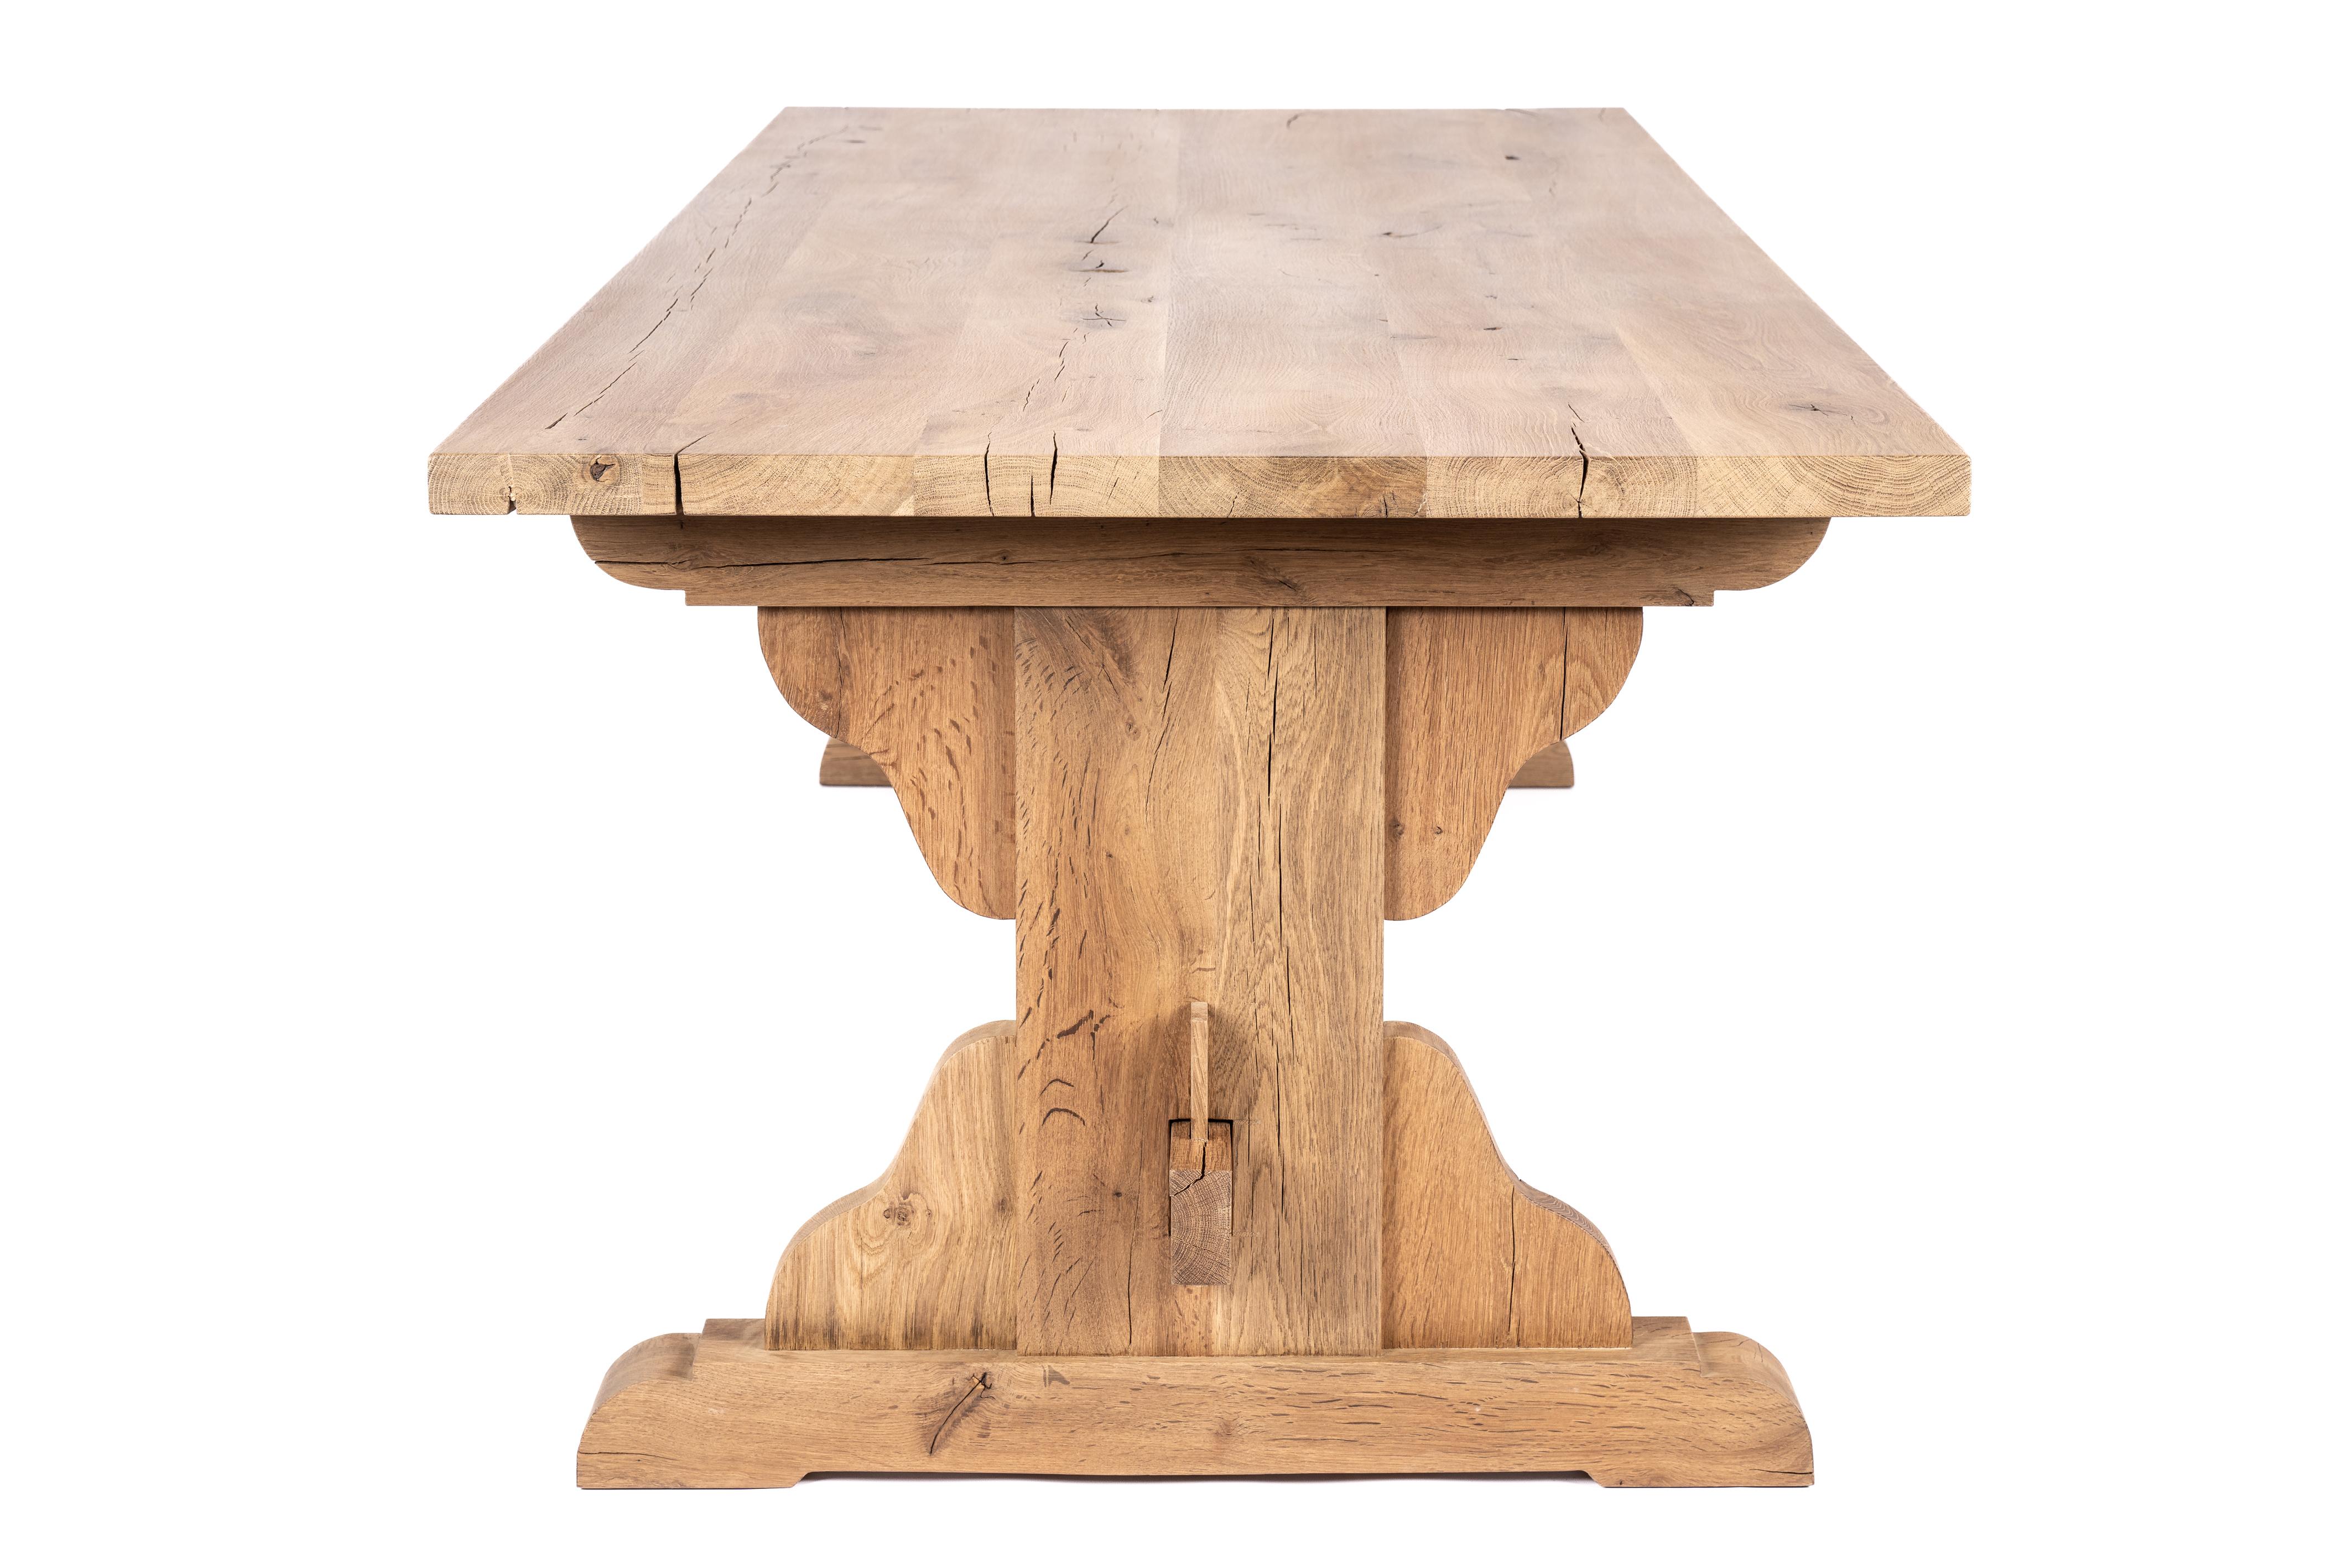 Dutch Bespoke Solid Aged French Oak Castle Dining Table With Matte Finish For Sale